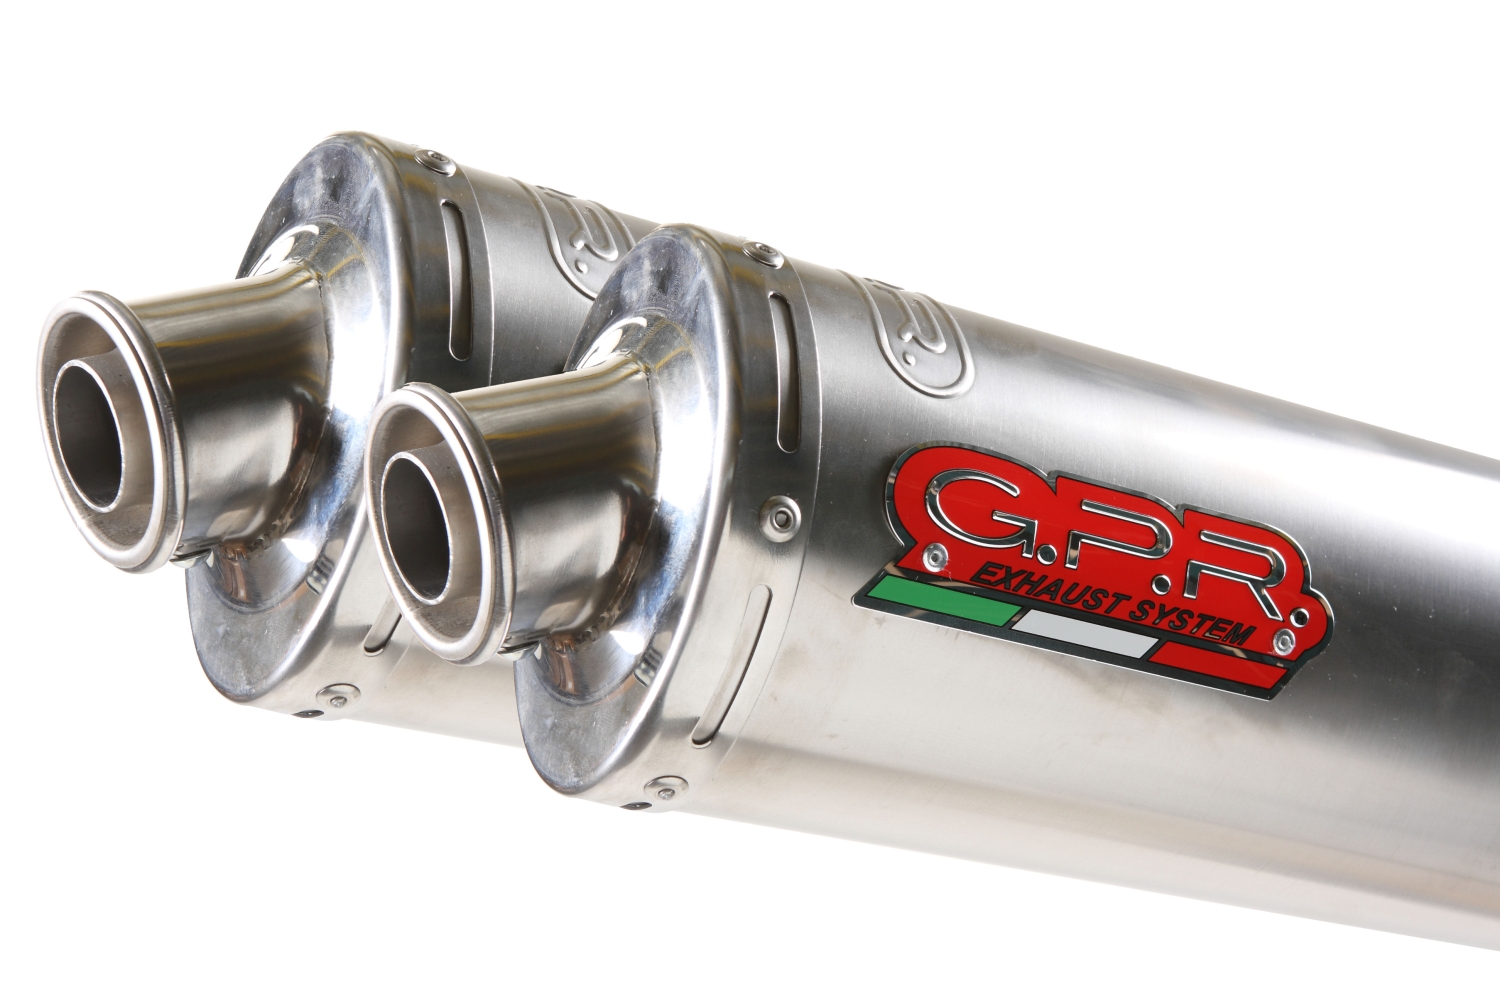 Exhaust system compatible with Ducati Monster S4R 2003-2007, Inox Tondo / Round, Dual Homologated legal slip-on exhaust including removable db killers and link pipes 